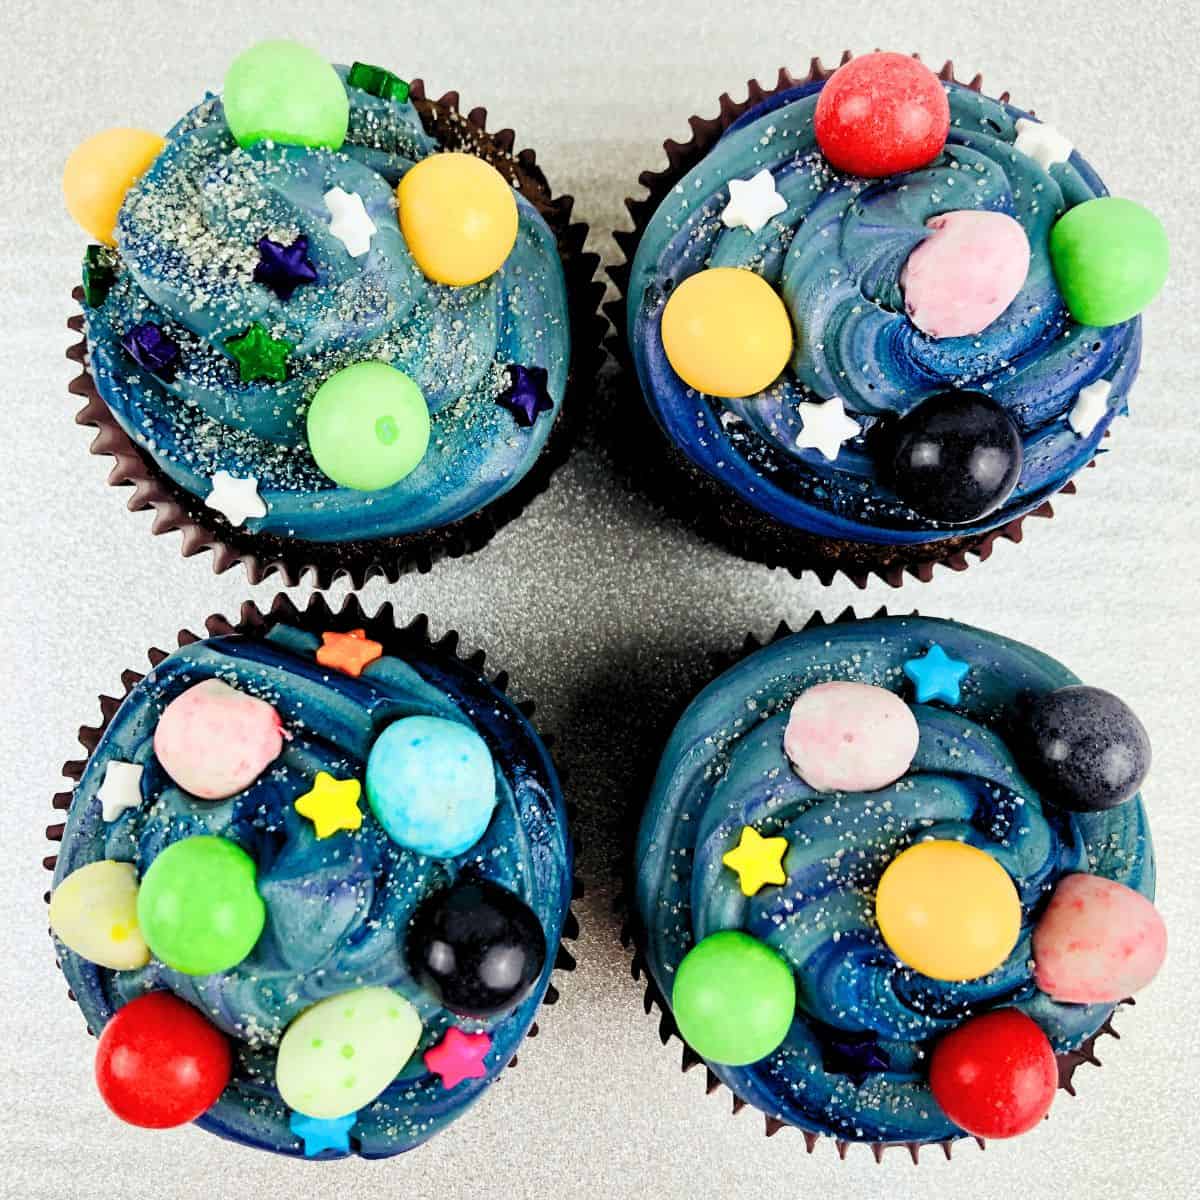 Chocolate cupcakes decorated with galaxy theme treats and a blue sky themed frosting.